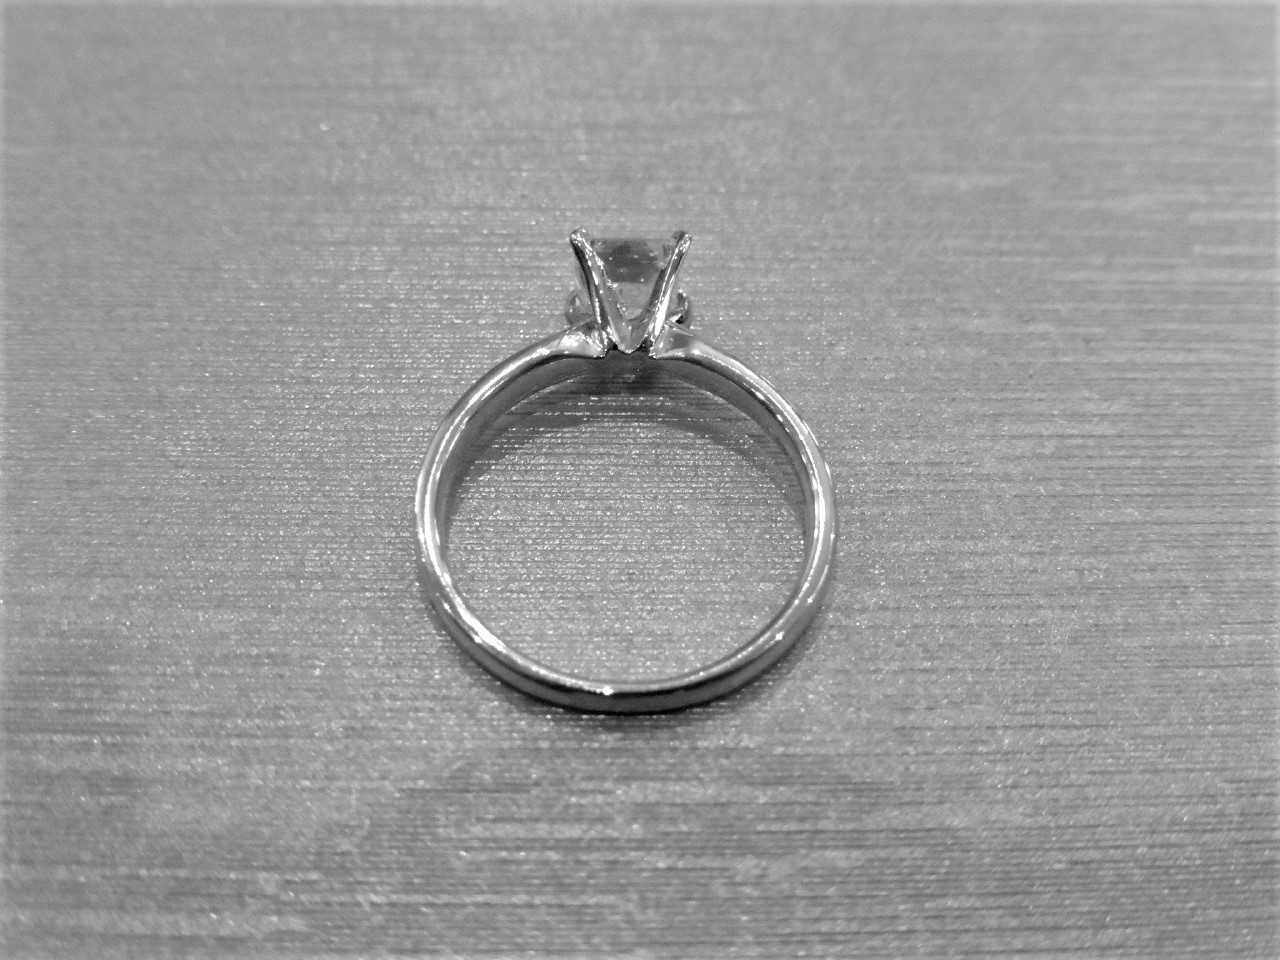 1.09Ct Diamond Solitaire Ring Set With A Princess Cut Diamond. - Image 2 of 3